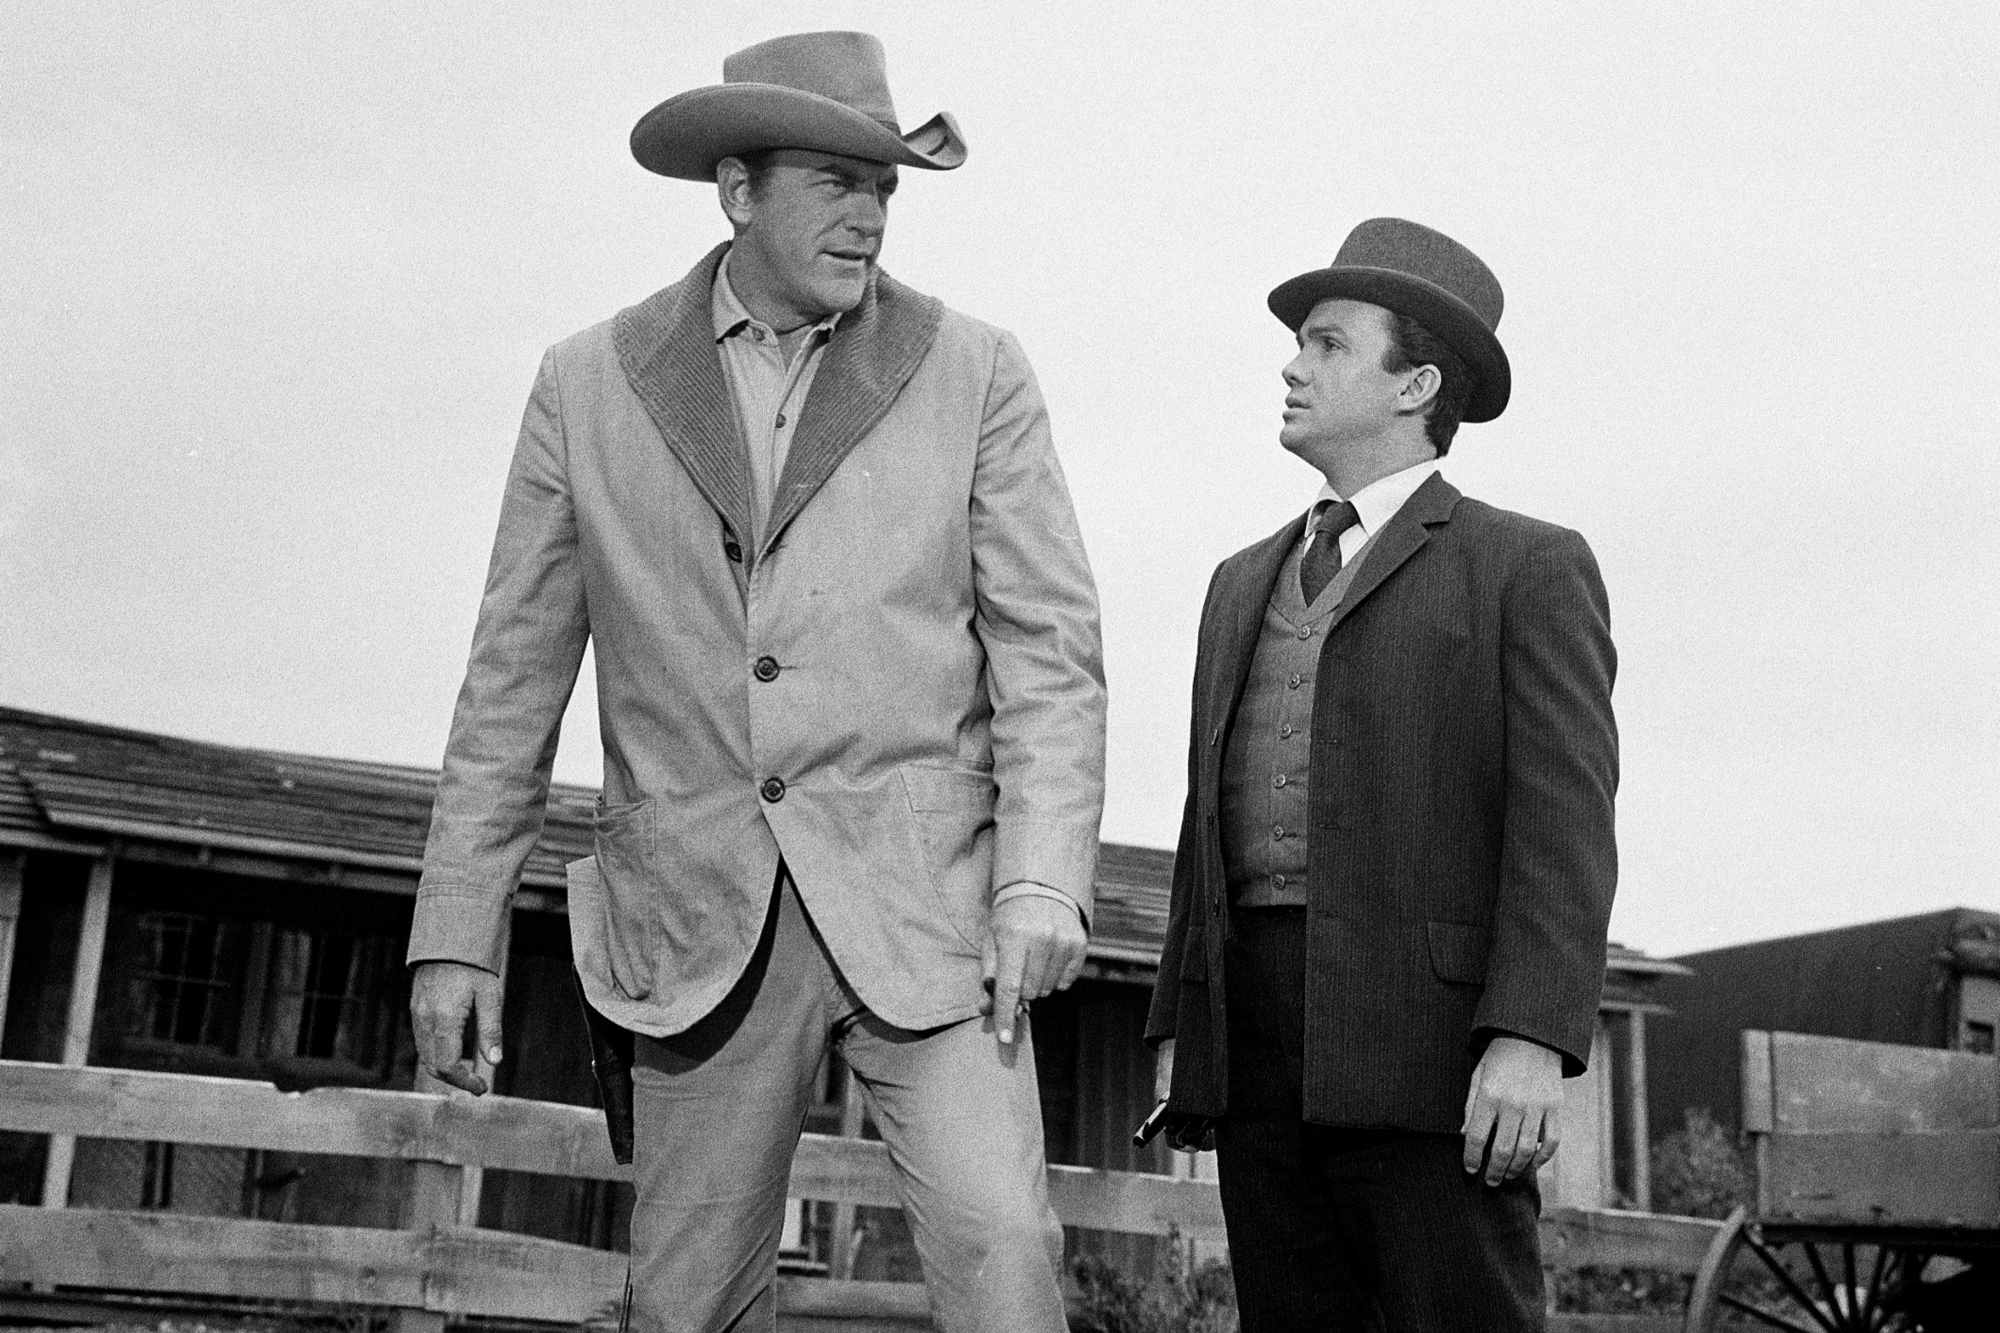 'Gunsmoke' Easter egg Western. James Arness as Matt Dillon and Ben Cooper as Breck Taylor. Arness and Cooper are looking at each other, wearing Western costumes.